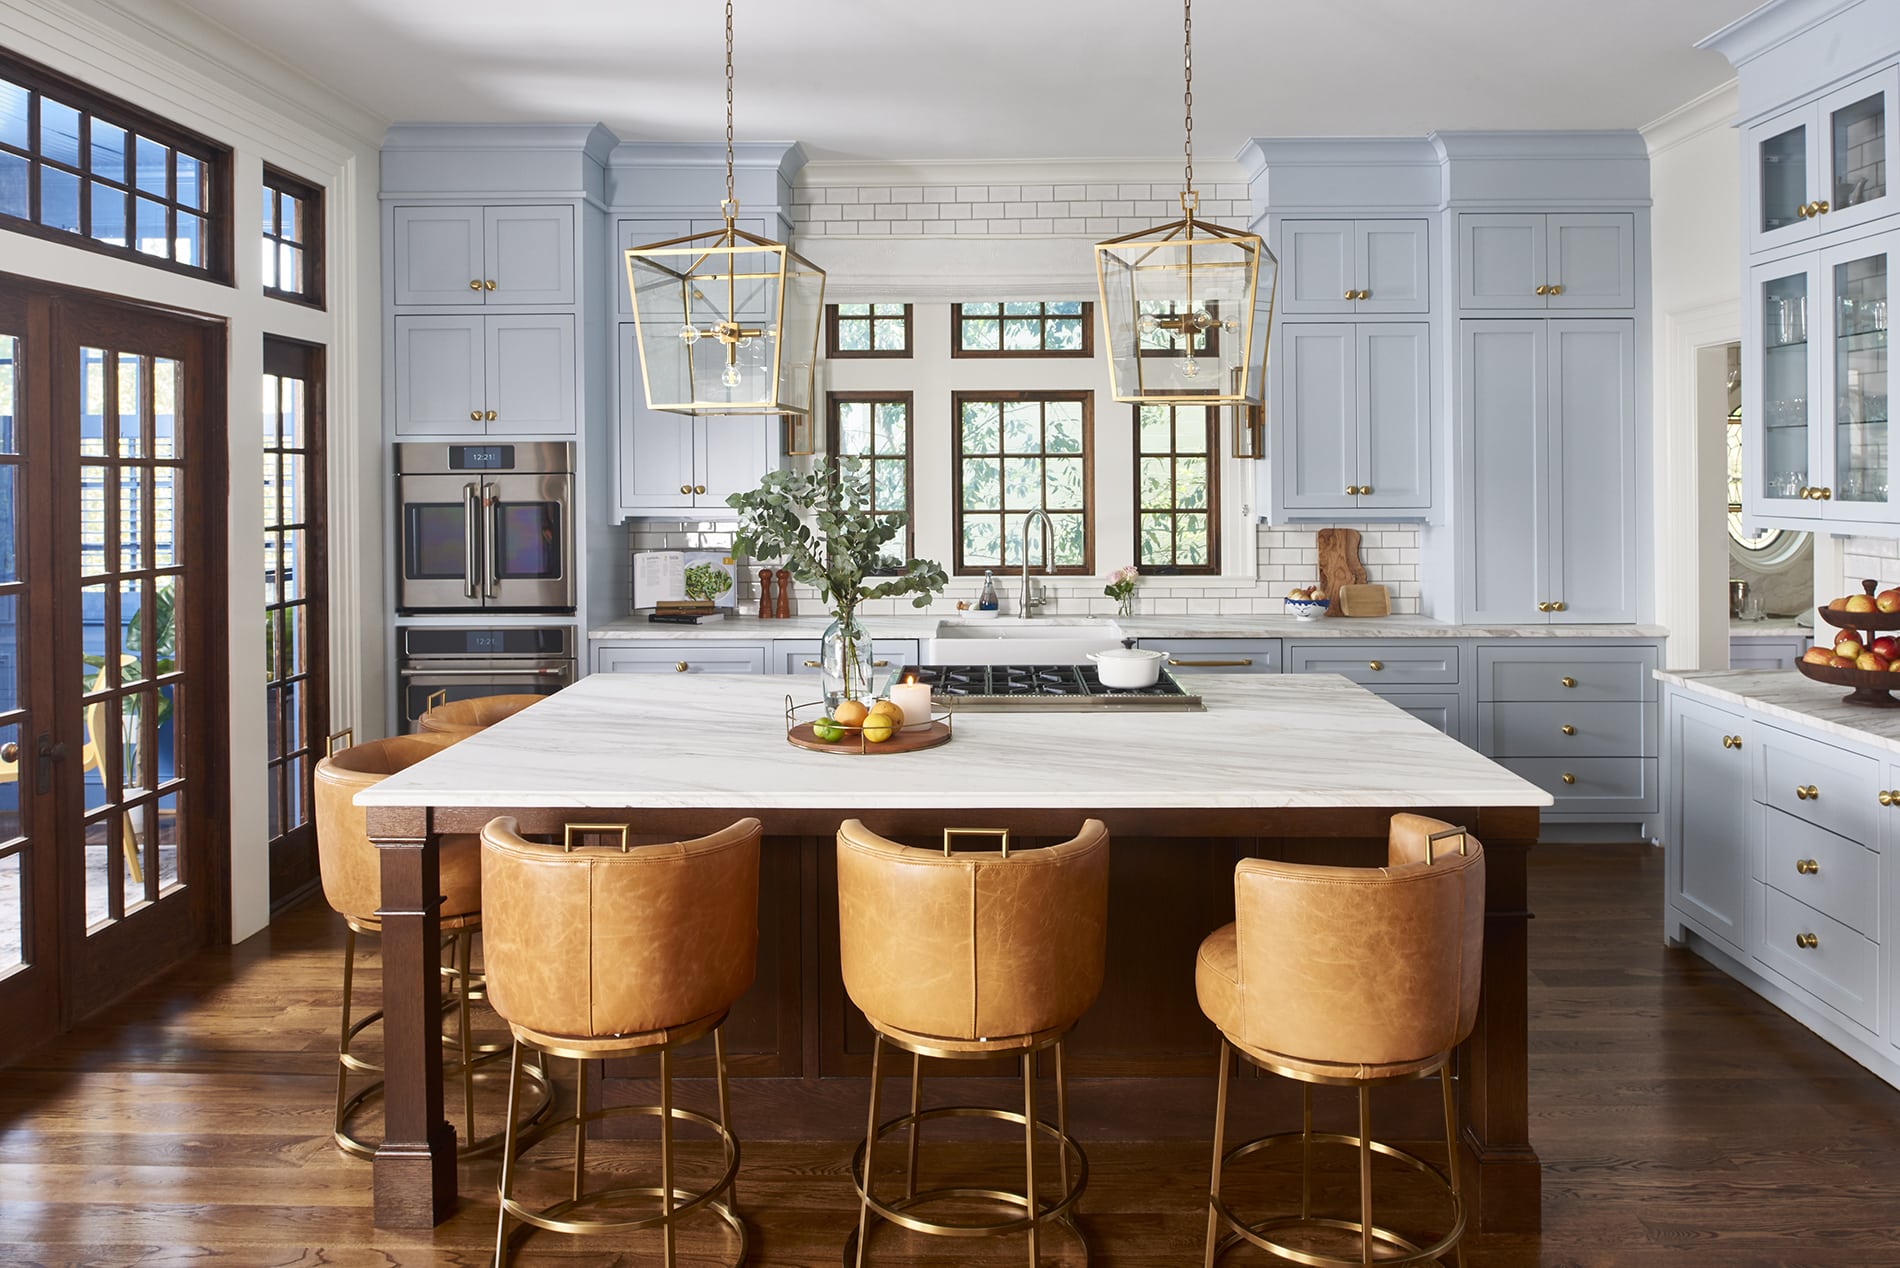 Transitional kitchen with light blue cabinets, large kitchen island with granite countertop, brass pendant lights and leather barstools.